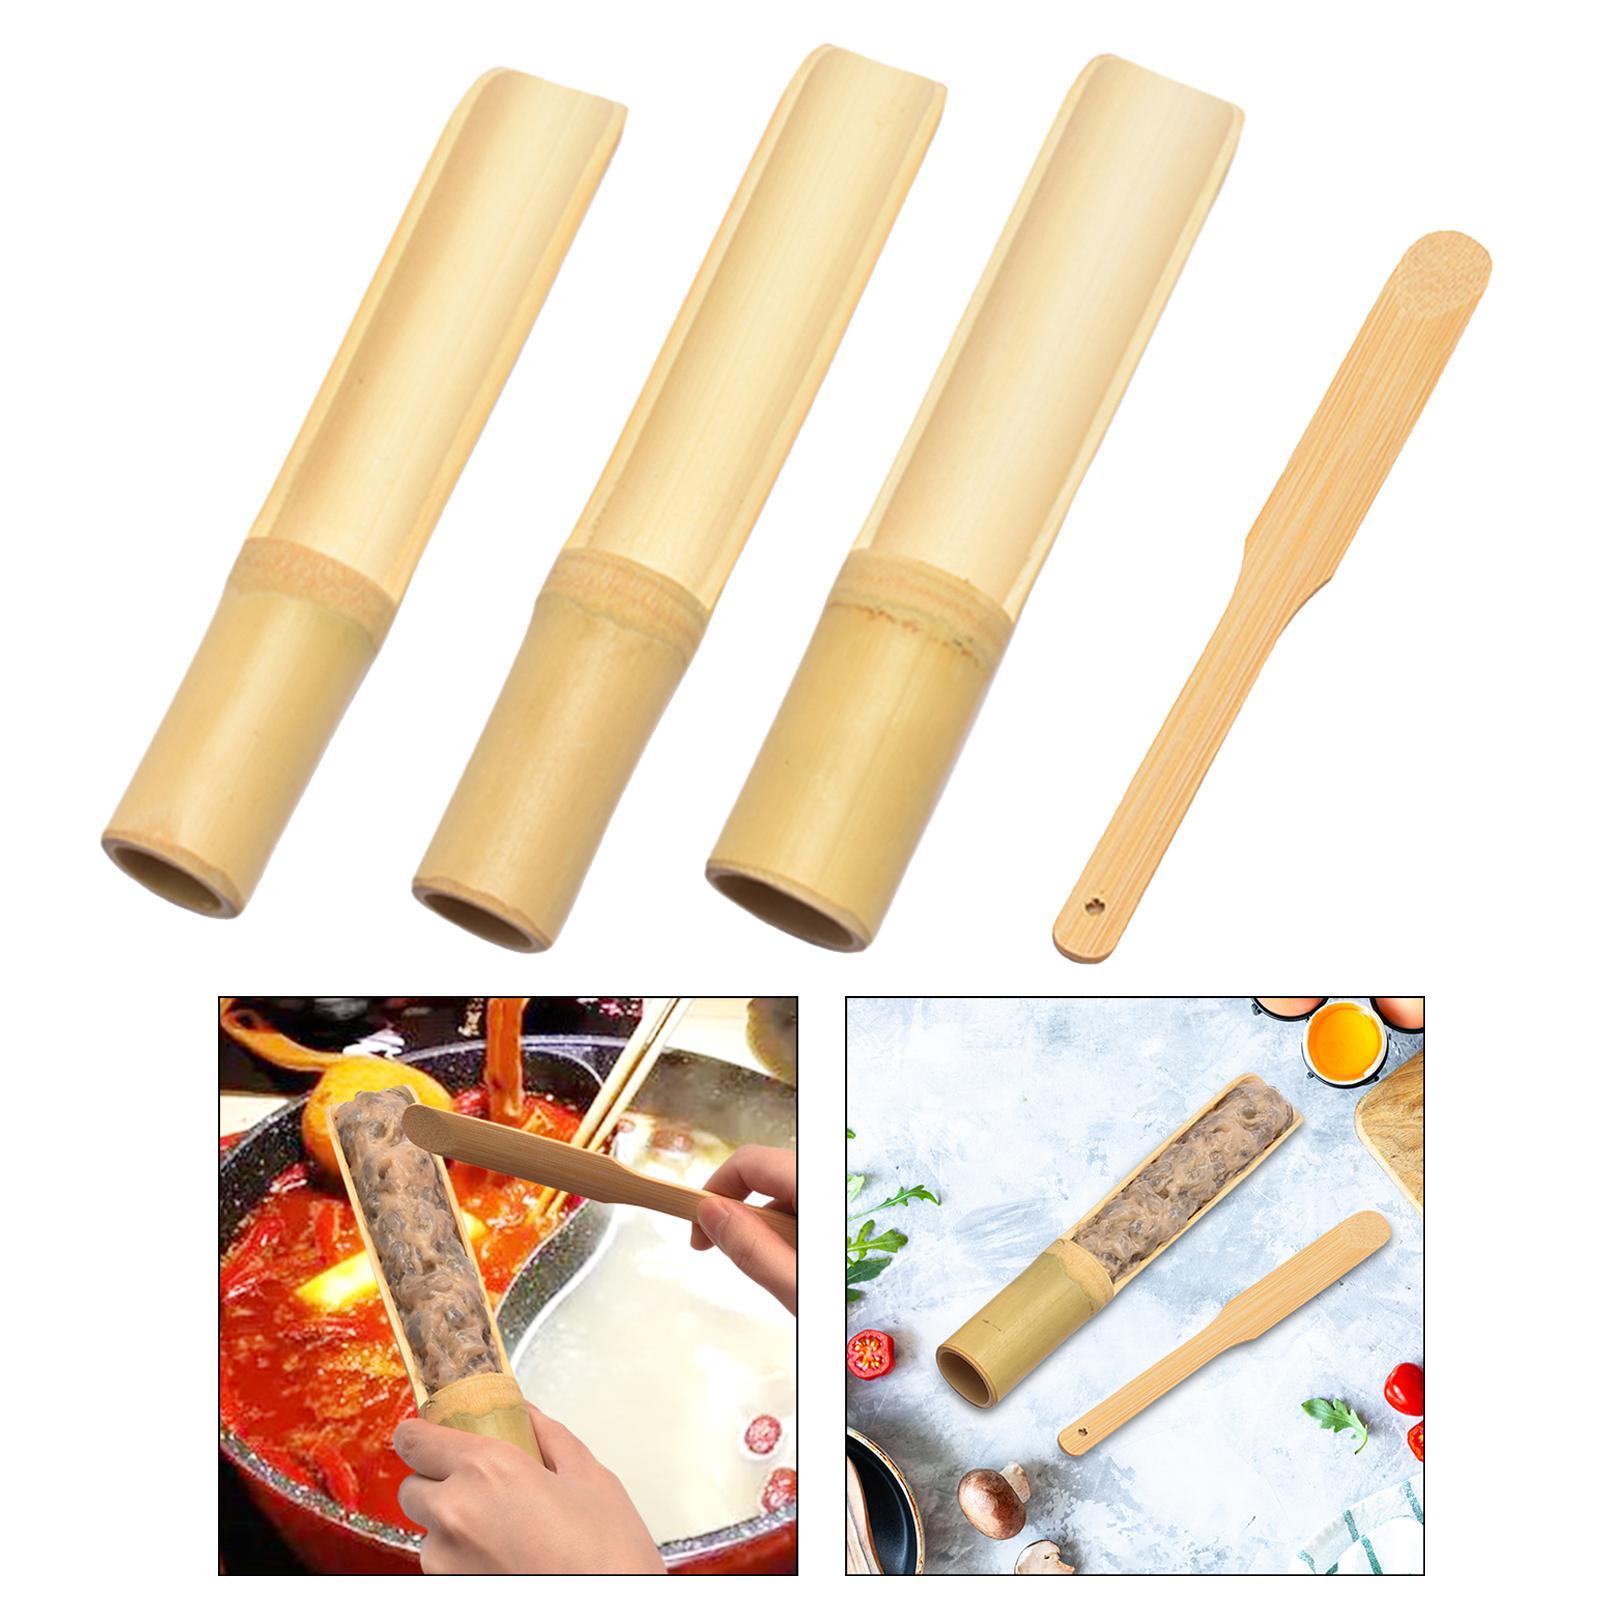 Bamboo Meatball Maker Tools Multifunction Utensils for Kitchen Cooking